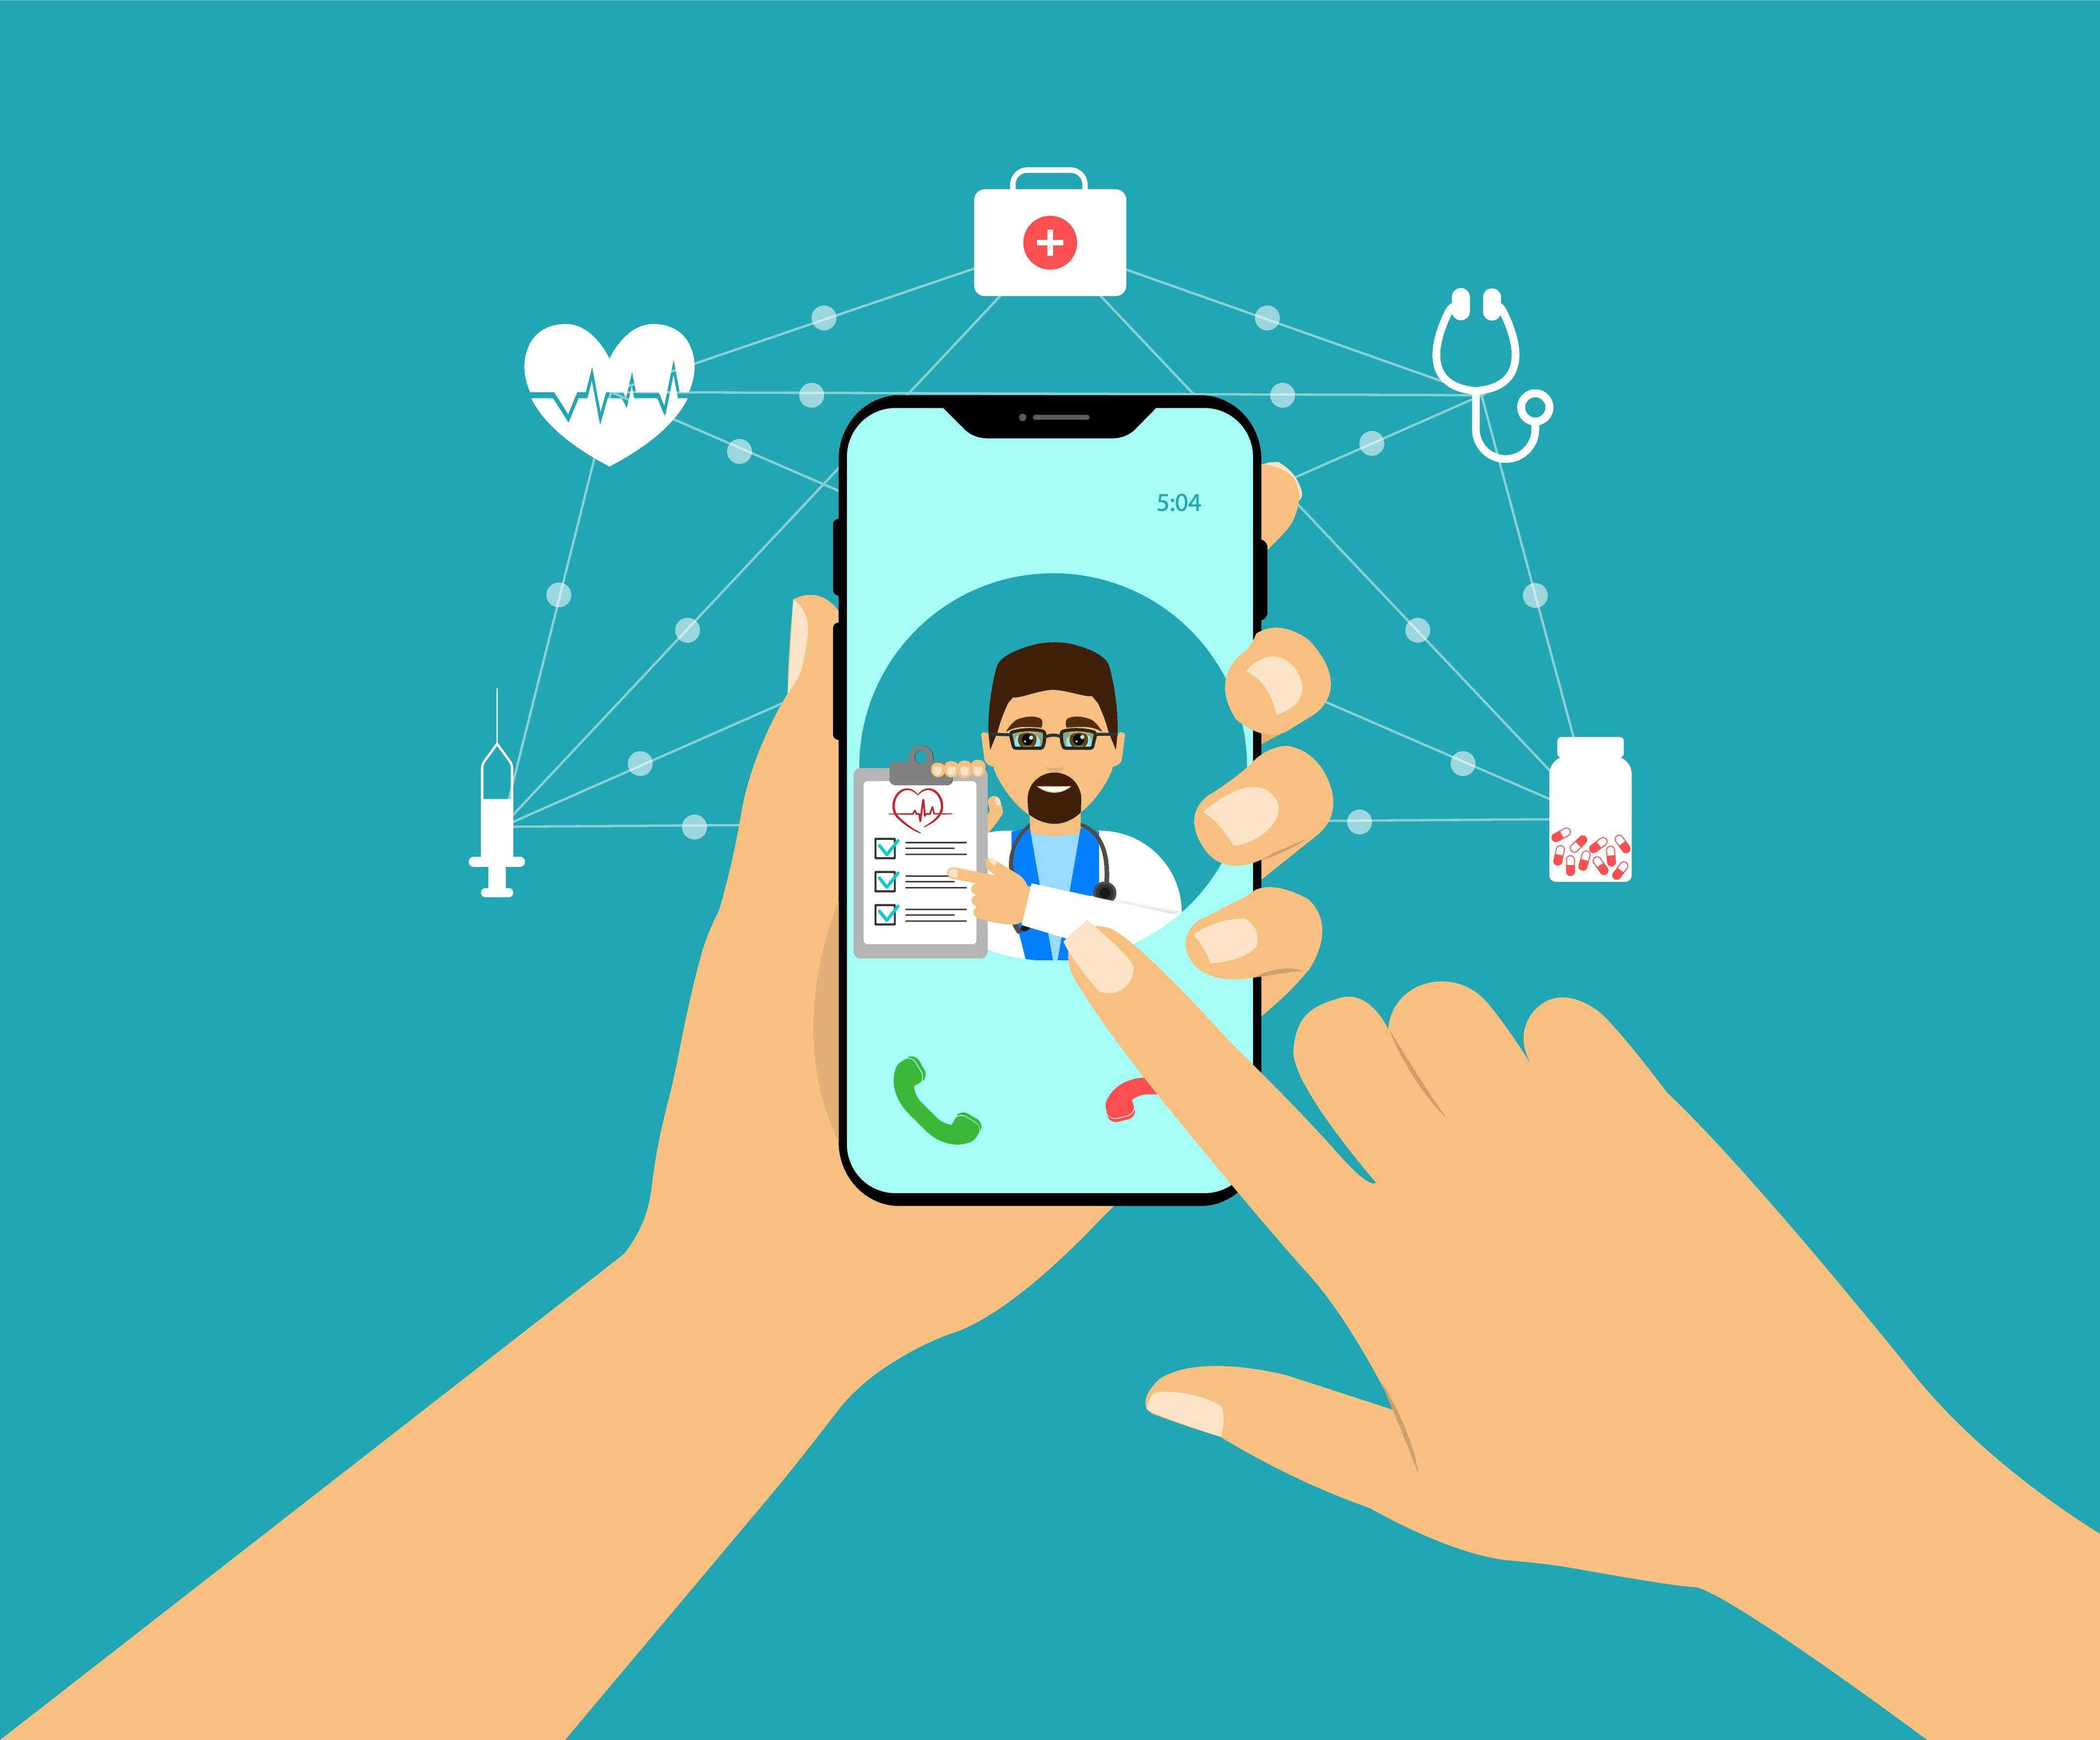 5 Steps to Make Telehealth Work for Physicians and Patients